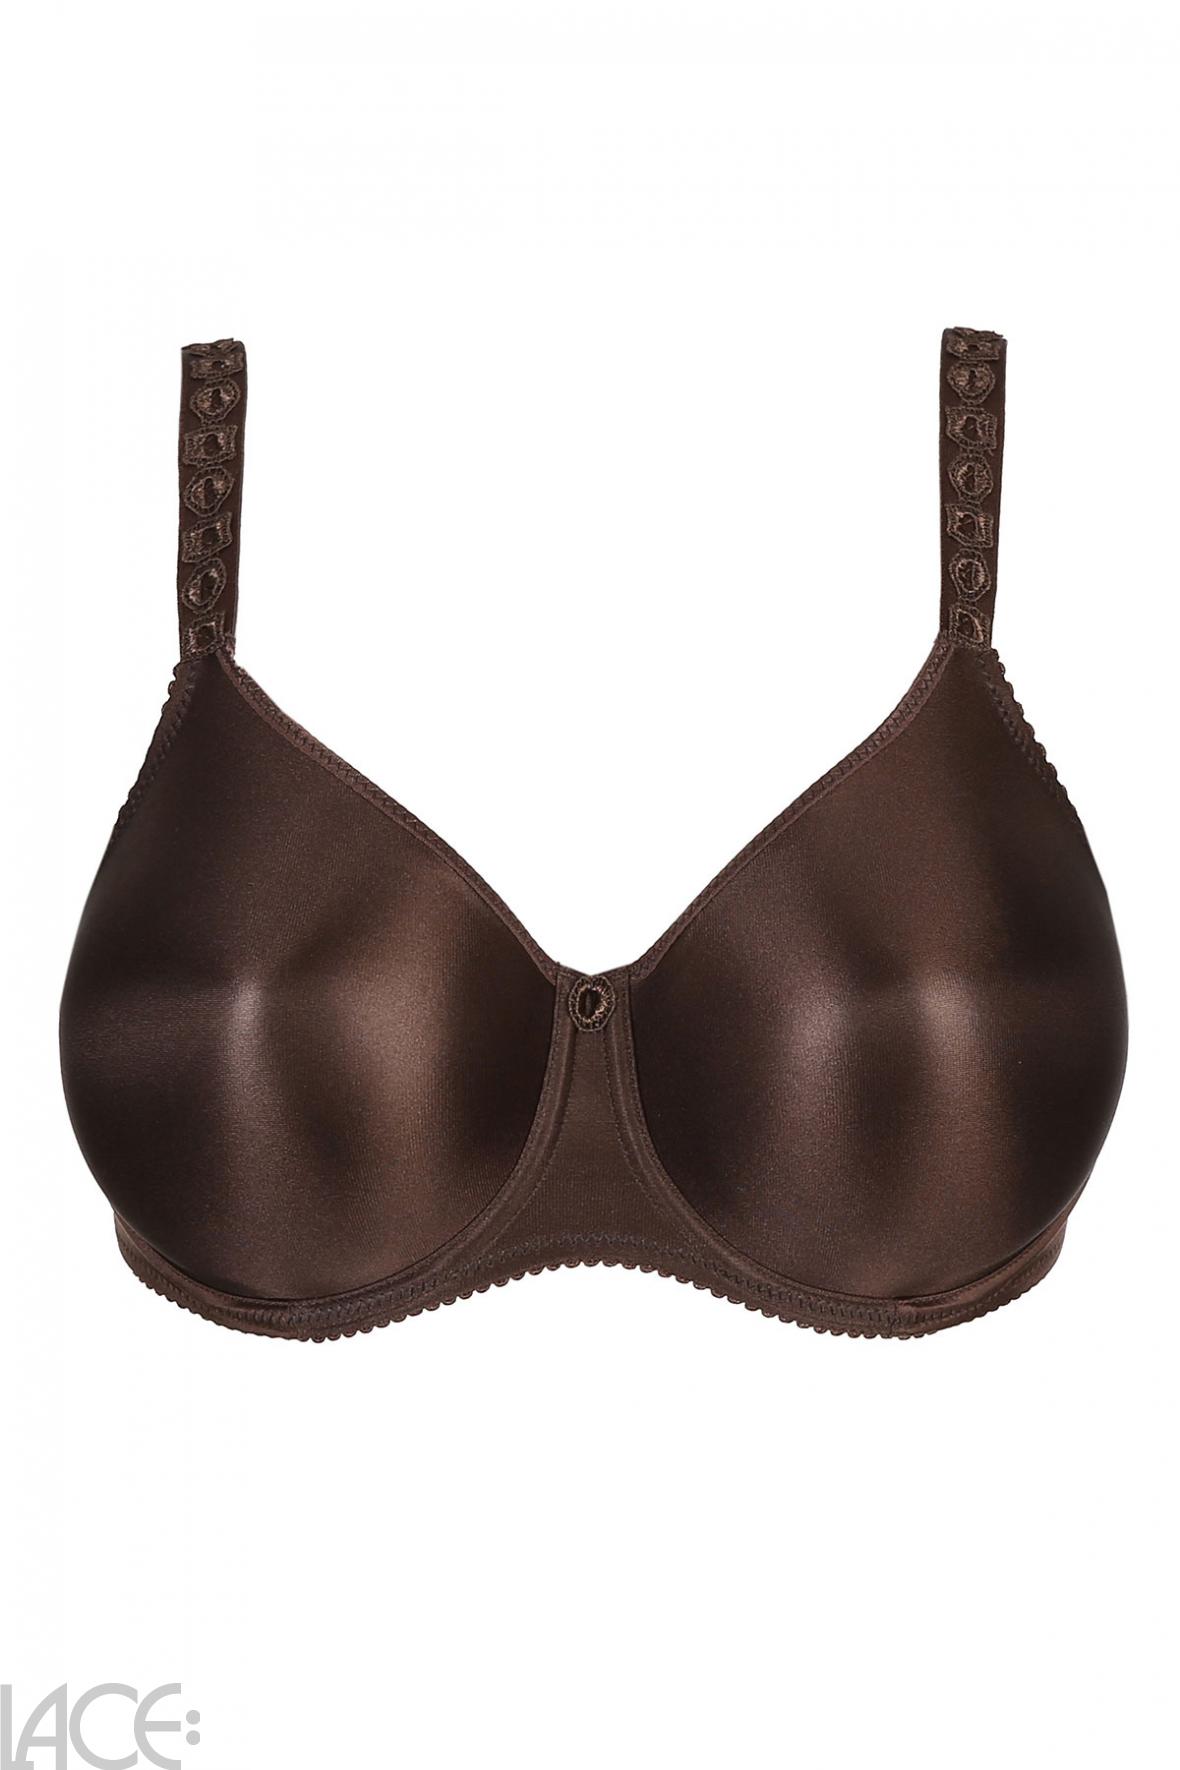 Semi-soft brown bra with delicate embroidery Gaia Elena Maxi 1107 buy at  best prices with international delivery in the catalog of the online store  of lingerie